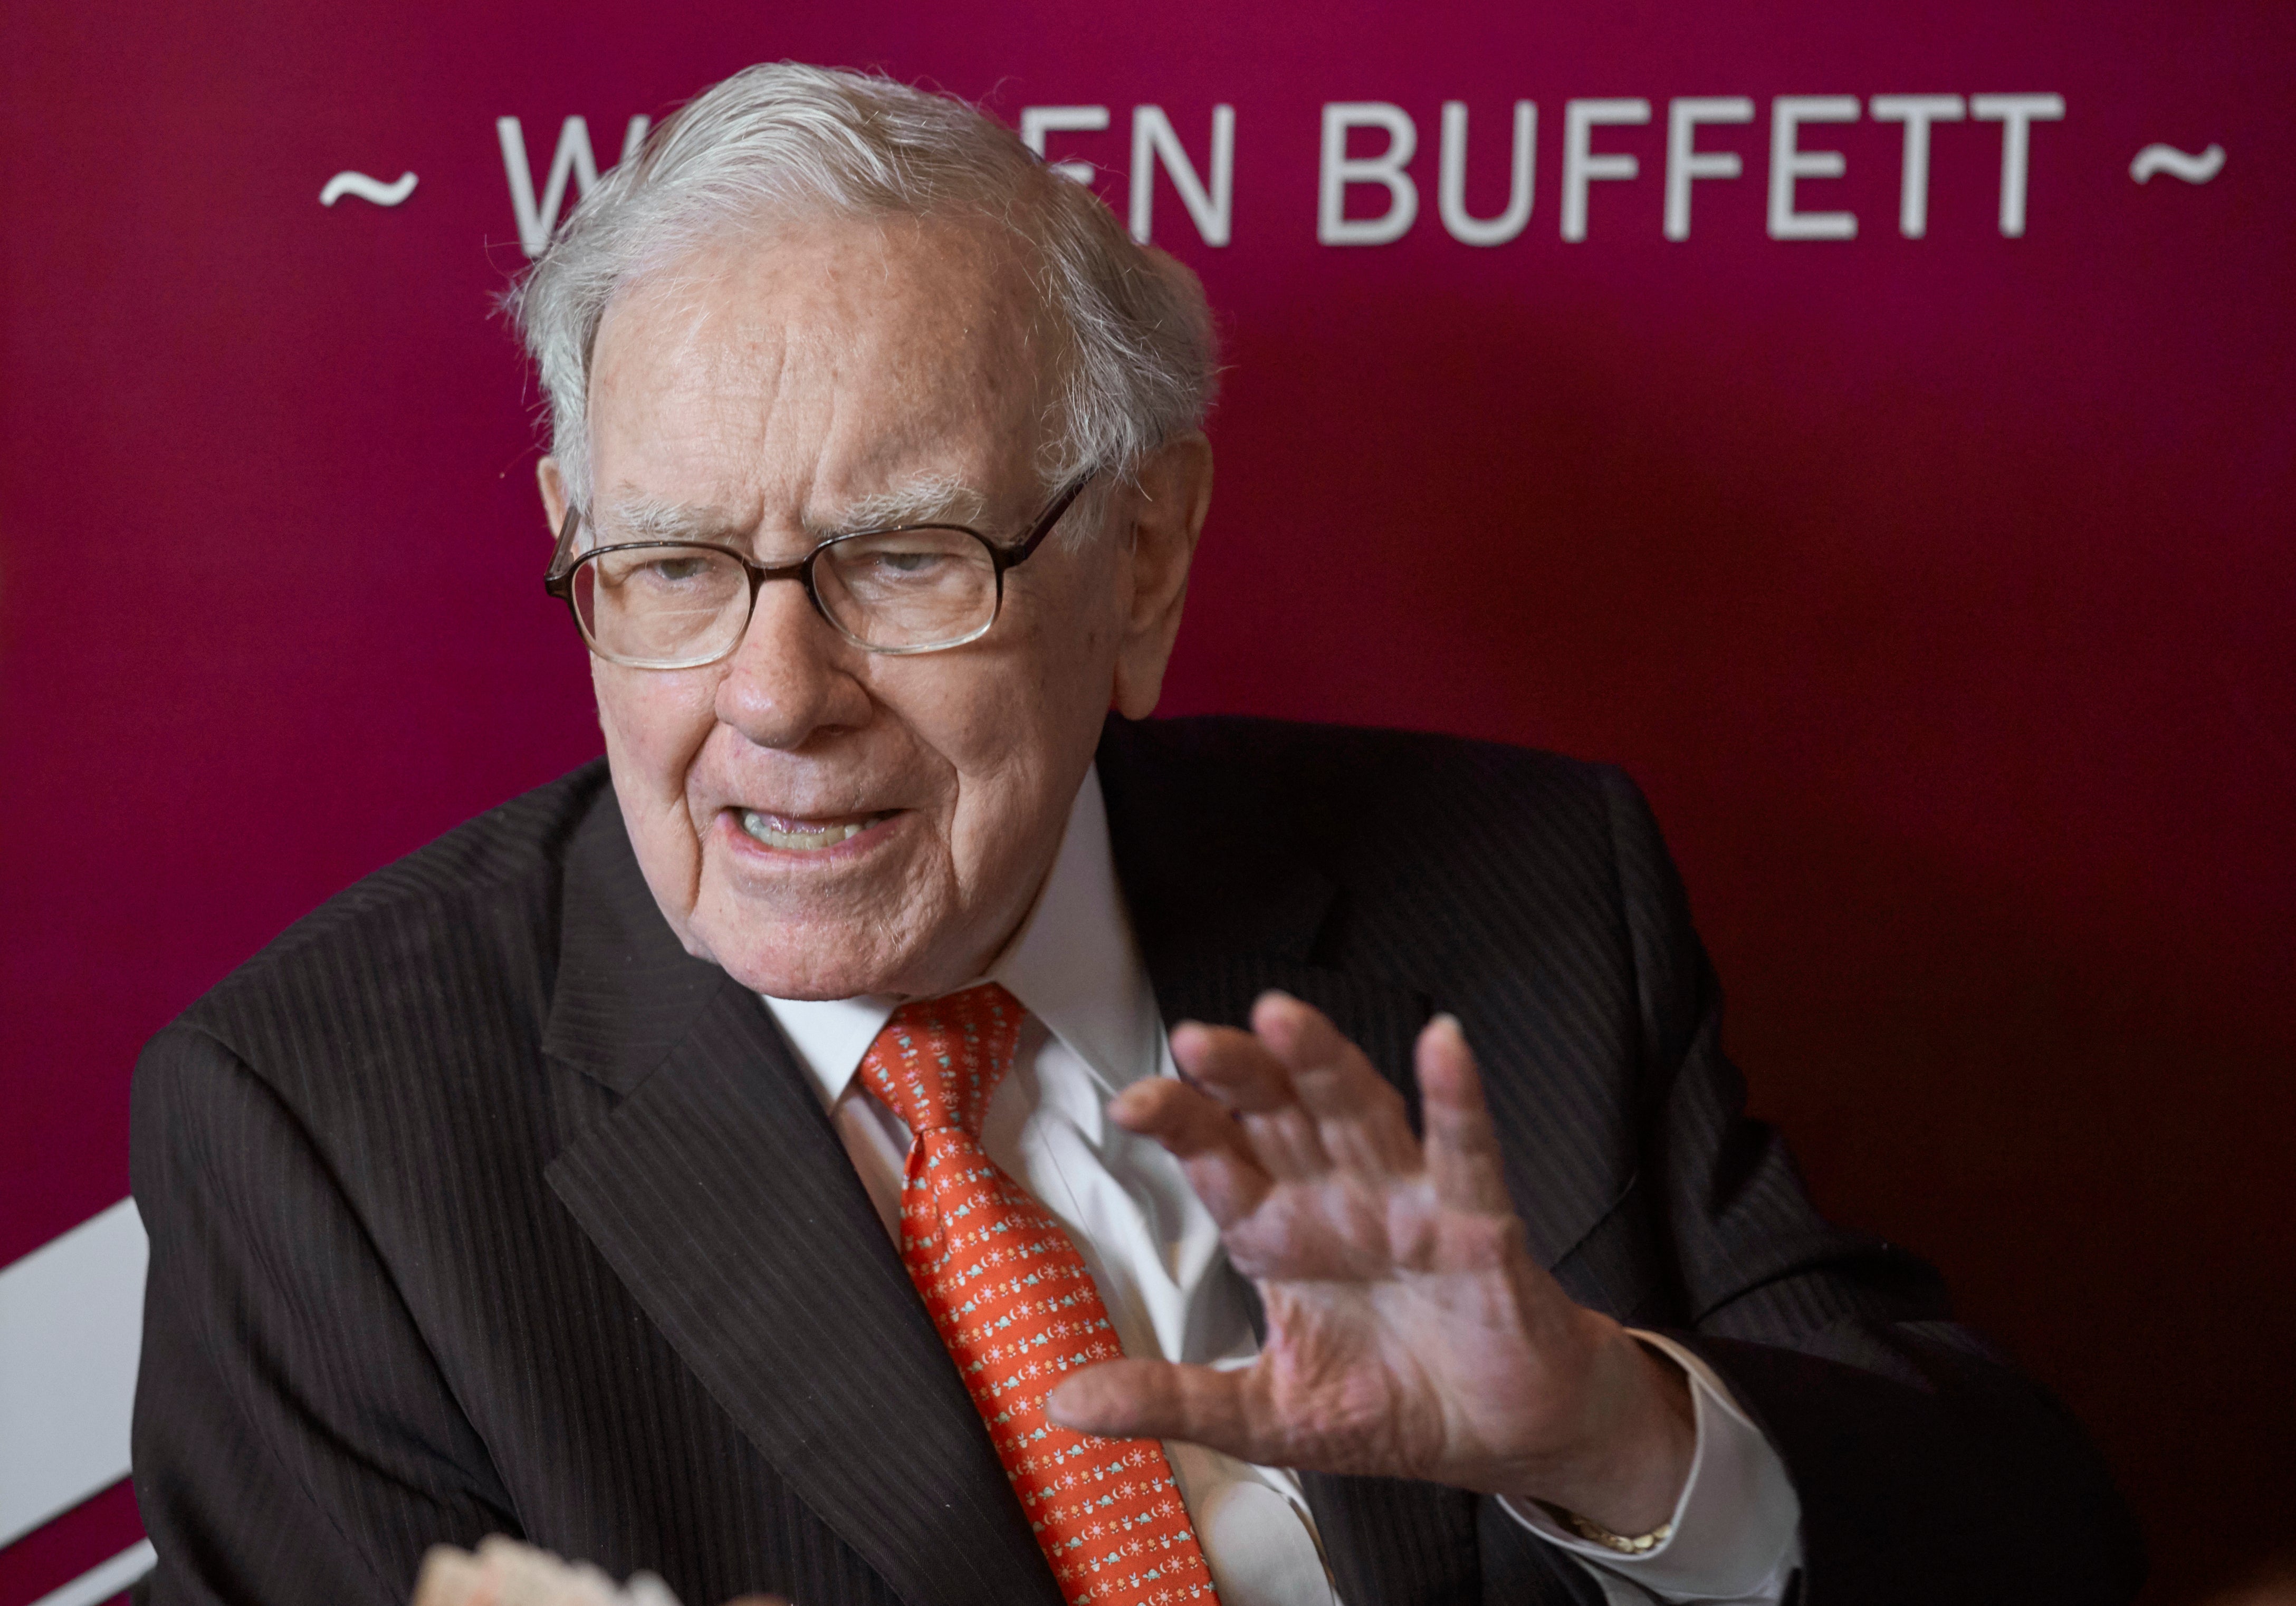 File photo: Warren Buffett, chairman and CEO of Berkshire Hathaway, speaks during a game of bridge following the annual Berkshire Hathaway shareholders meeting in 2019